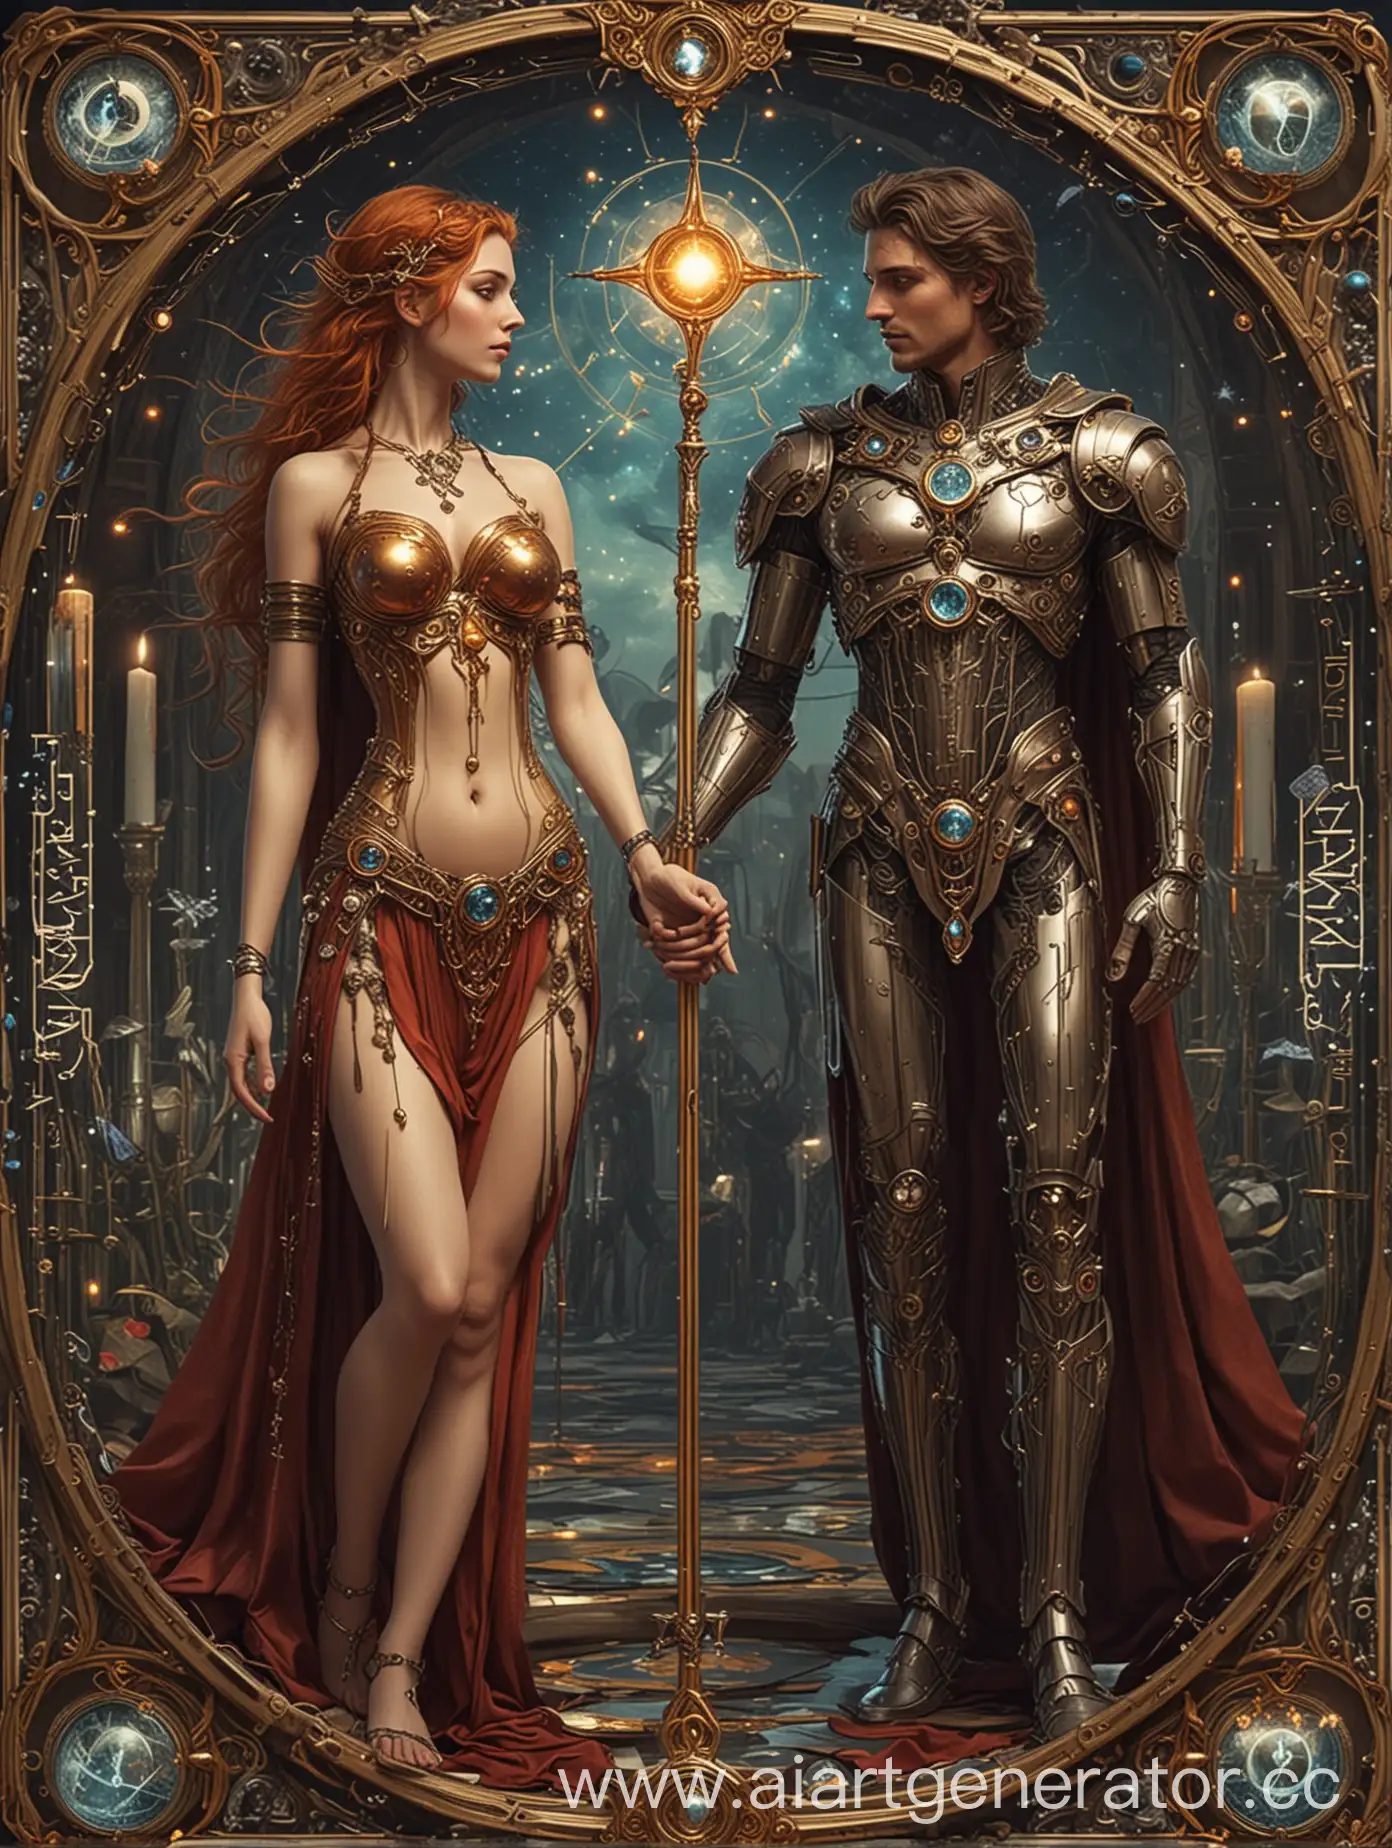 tarot: futuristic ai with maximum detail with elements of sexuality, magic - Arcanum The World : The Lovers